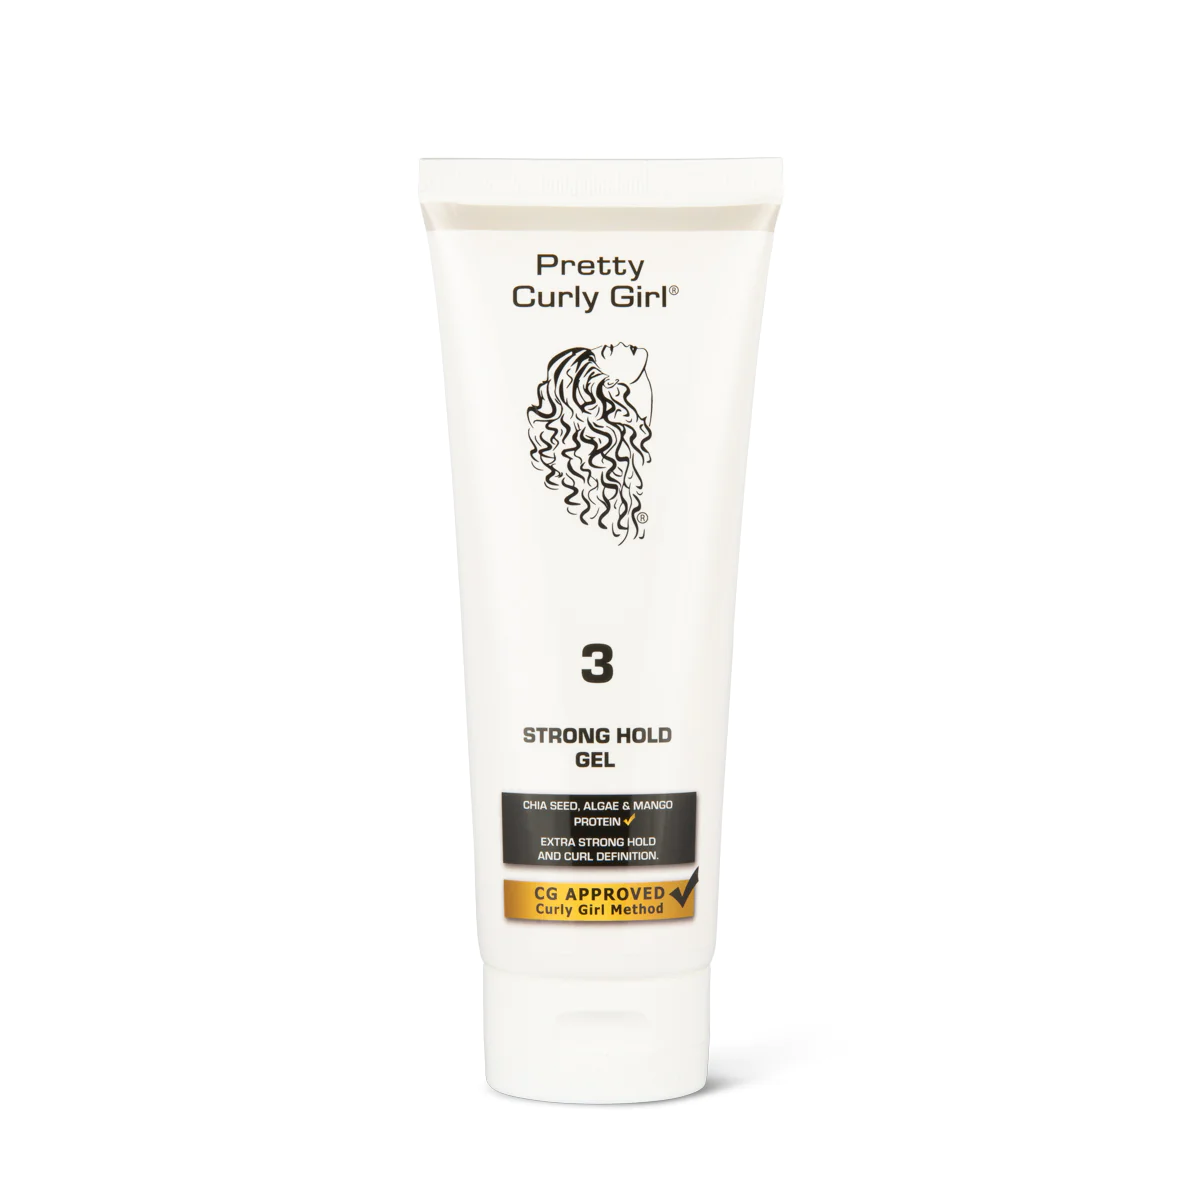 Pretty Curly Girl Strong Hold Gel Travel Size